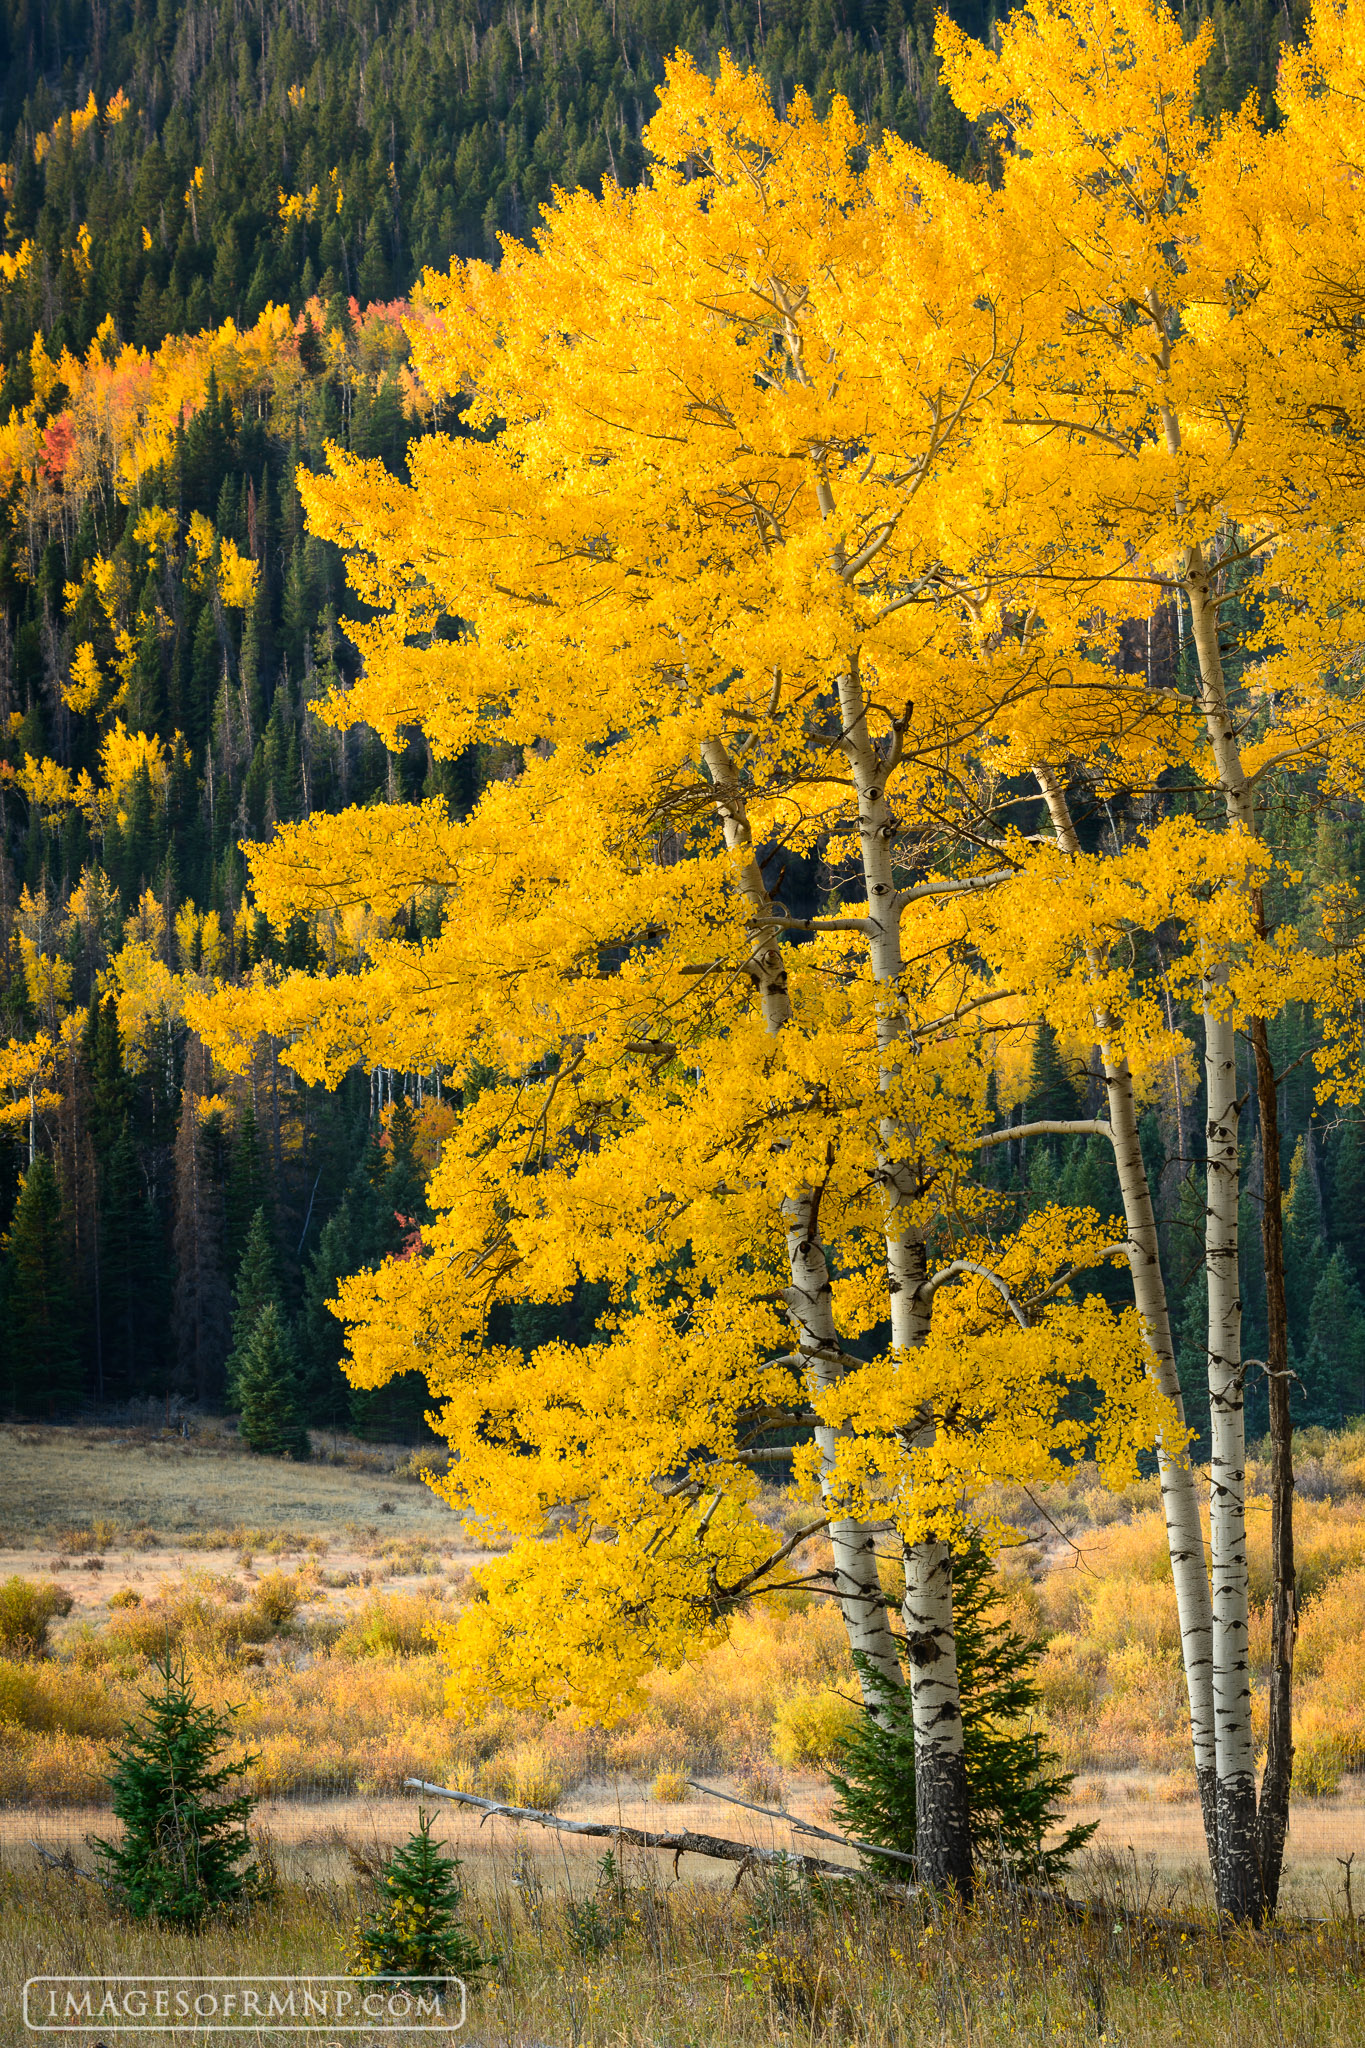 Golden aspen look out over a meadow in Rocky Mountain National Park during peak autumn colors. Just out of view at the far side...